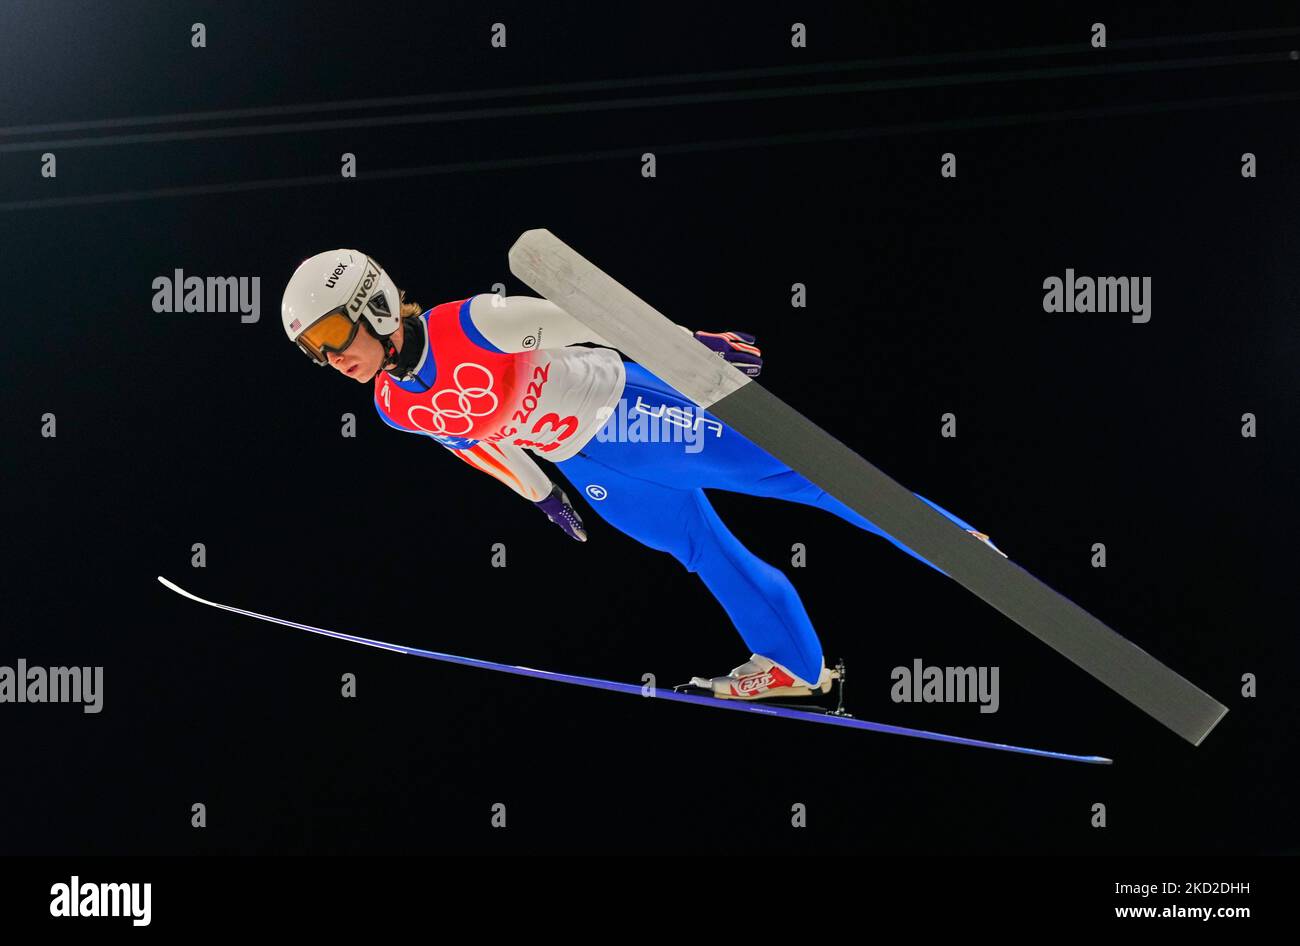 Gasienica Patrick from USA during Ski Jumping at the Beijing 2022 Winter Olympic Games at Zhangjiakou Genting Snow Park on February 11, 2022 in Zhangjiakou, China. (Photo by Ulrik Pedersen/NurPhoto) Stock Photo